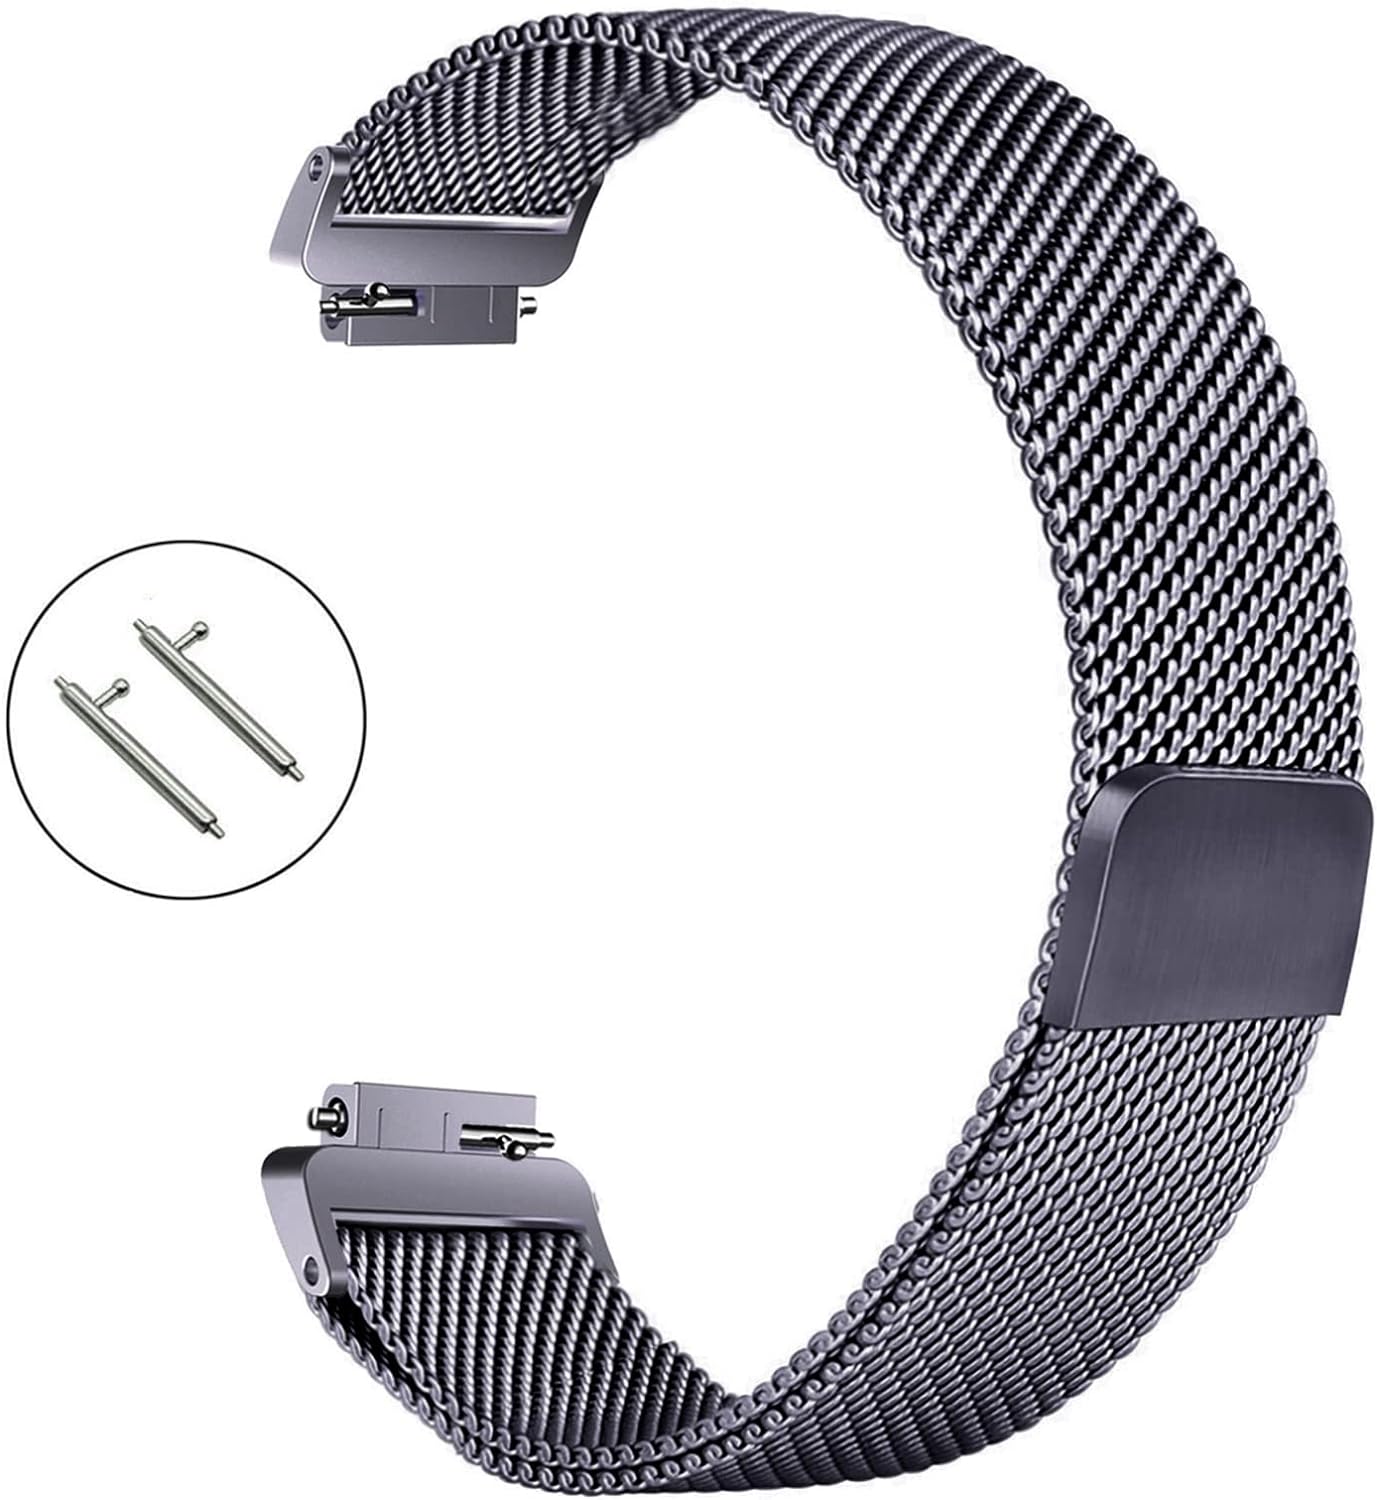 Wongeto for Fitbit Inspire 3 Bands Women Men, Stainless Steel Metal Mesh Loop Adjustable Magnetic Wristband Replacement Strap for Fitbit Inspire 3 Fitness Tracker